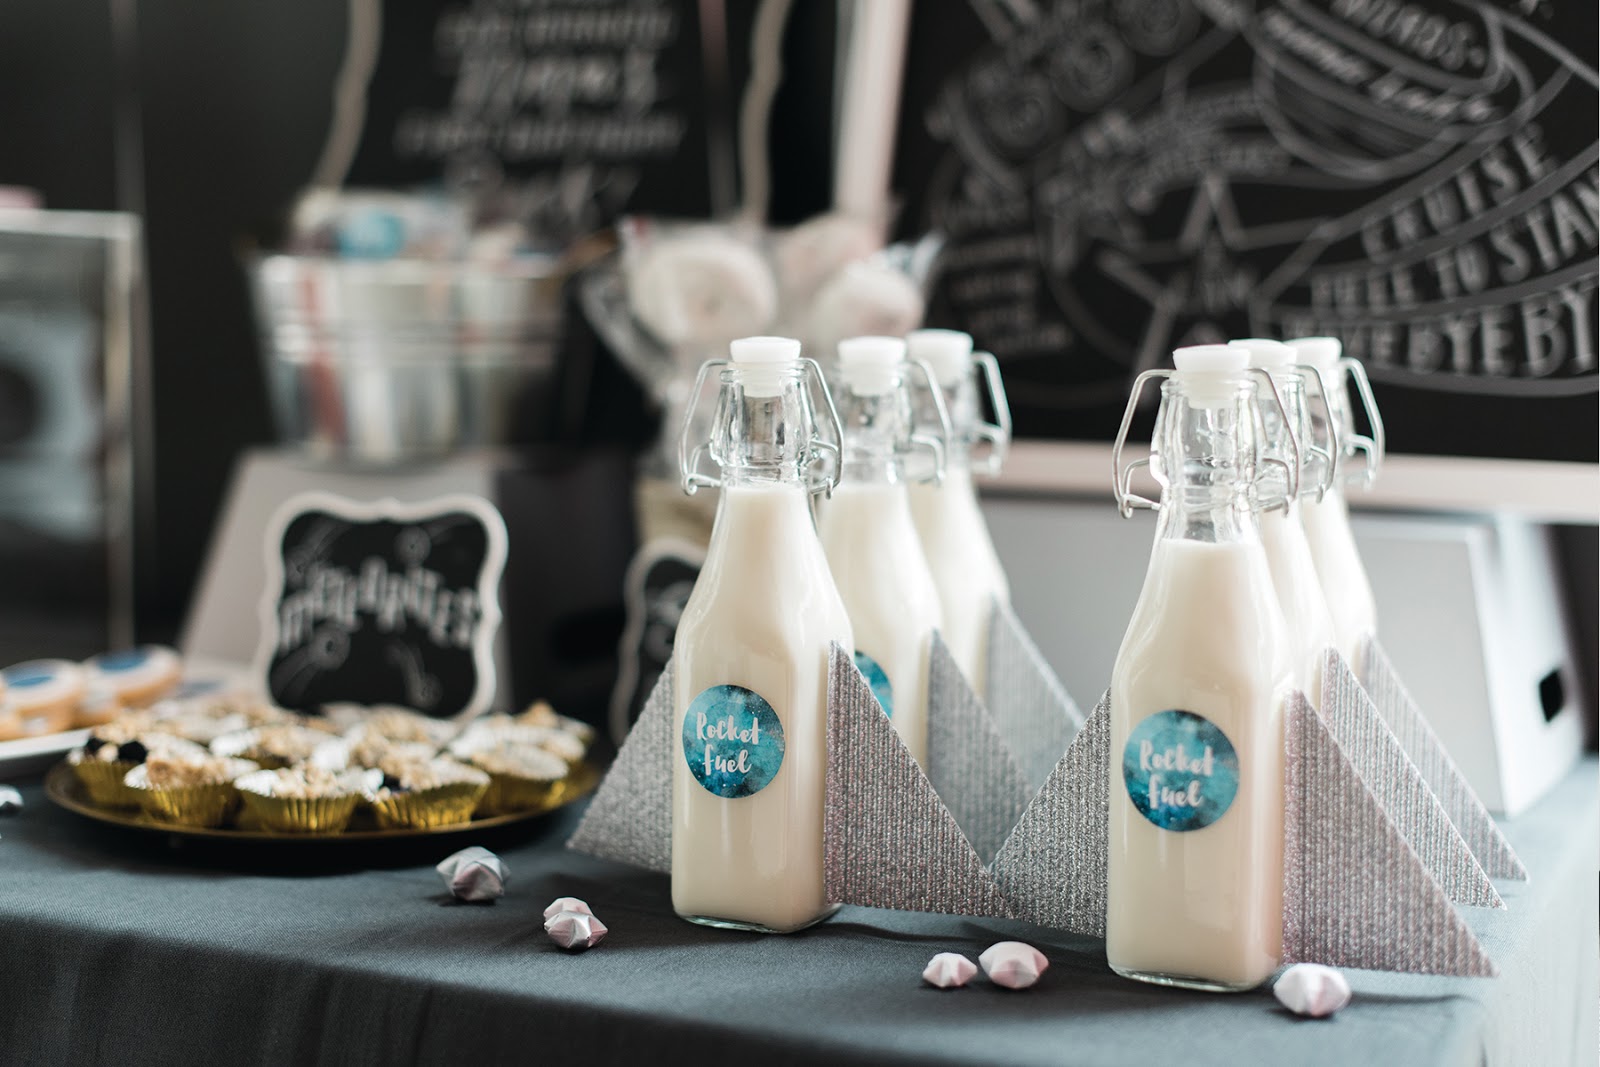 let's party to the moon and back - first birthday party | Creative Bag